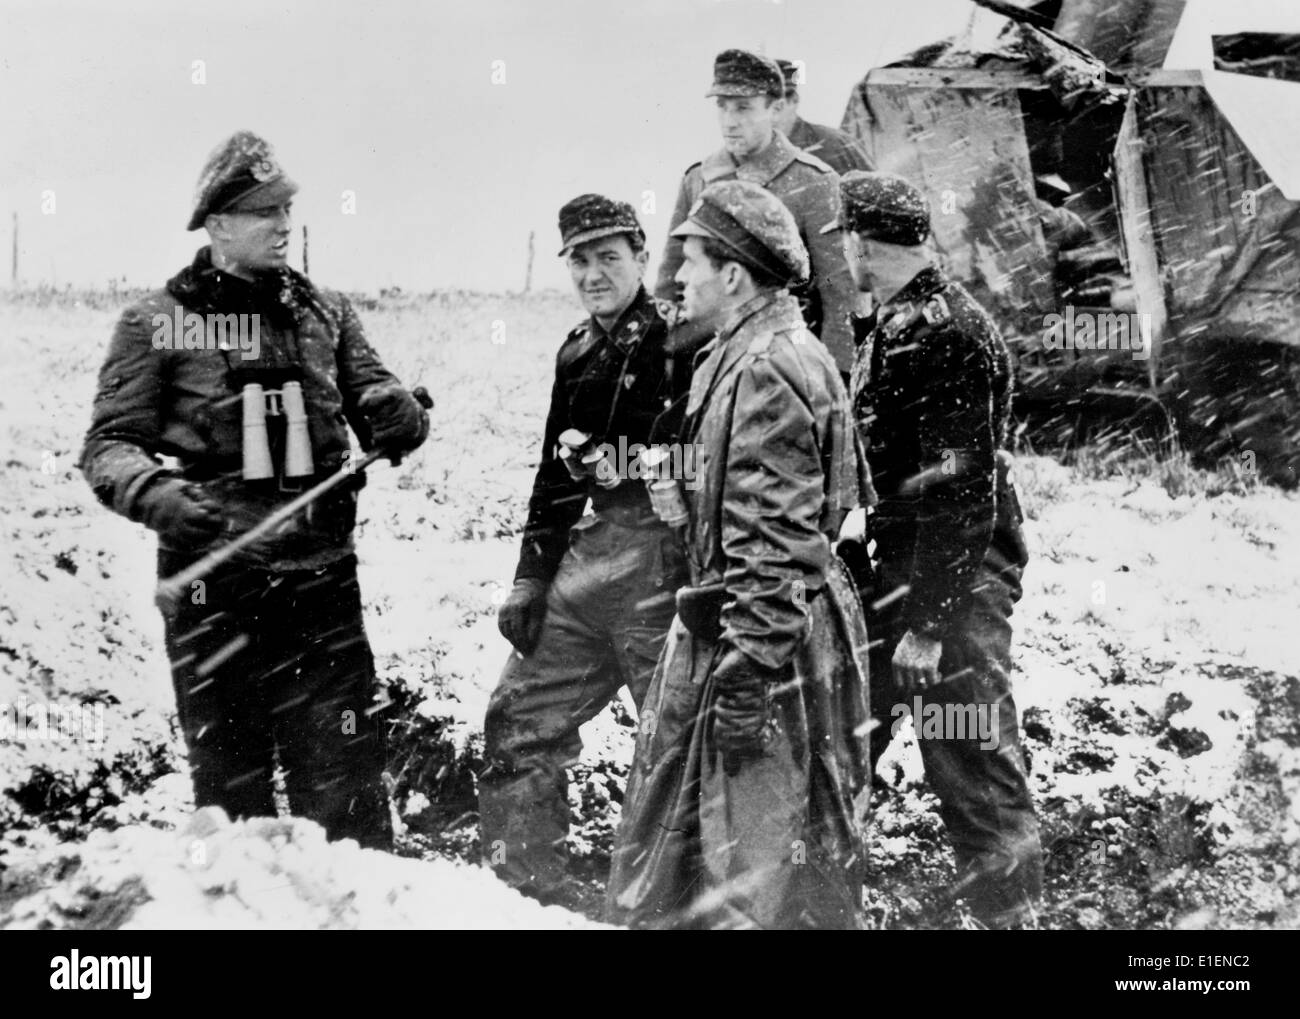 German soldiers prepare to attack American troops along the Huertgen Forest front near Aachen, Germany, December 1944. The Nazi propaganda text written on the back in 22 December 1944 reads: 'On the southern wing of the Aachen Front. Before the attack by German tanks, there is a short discussion. The dense snow makes it easy to carry out the plans, making it possible for German tanks to approach the opponents without being noticed.' Fotoarchiv für Zeitgeschichtee - NO WIRE SERVICE Stock Photo